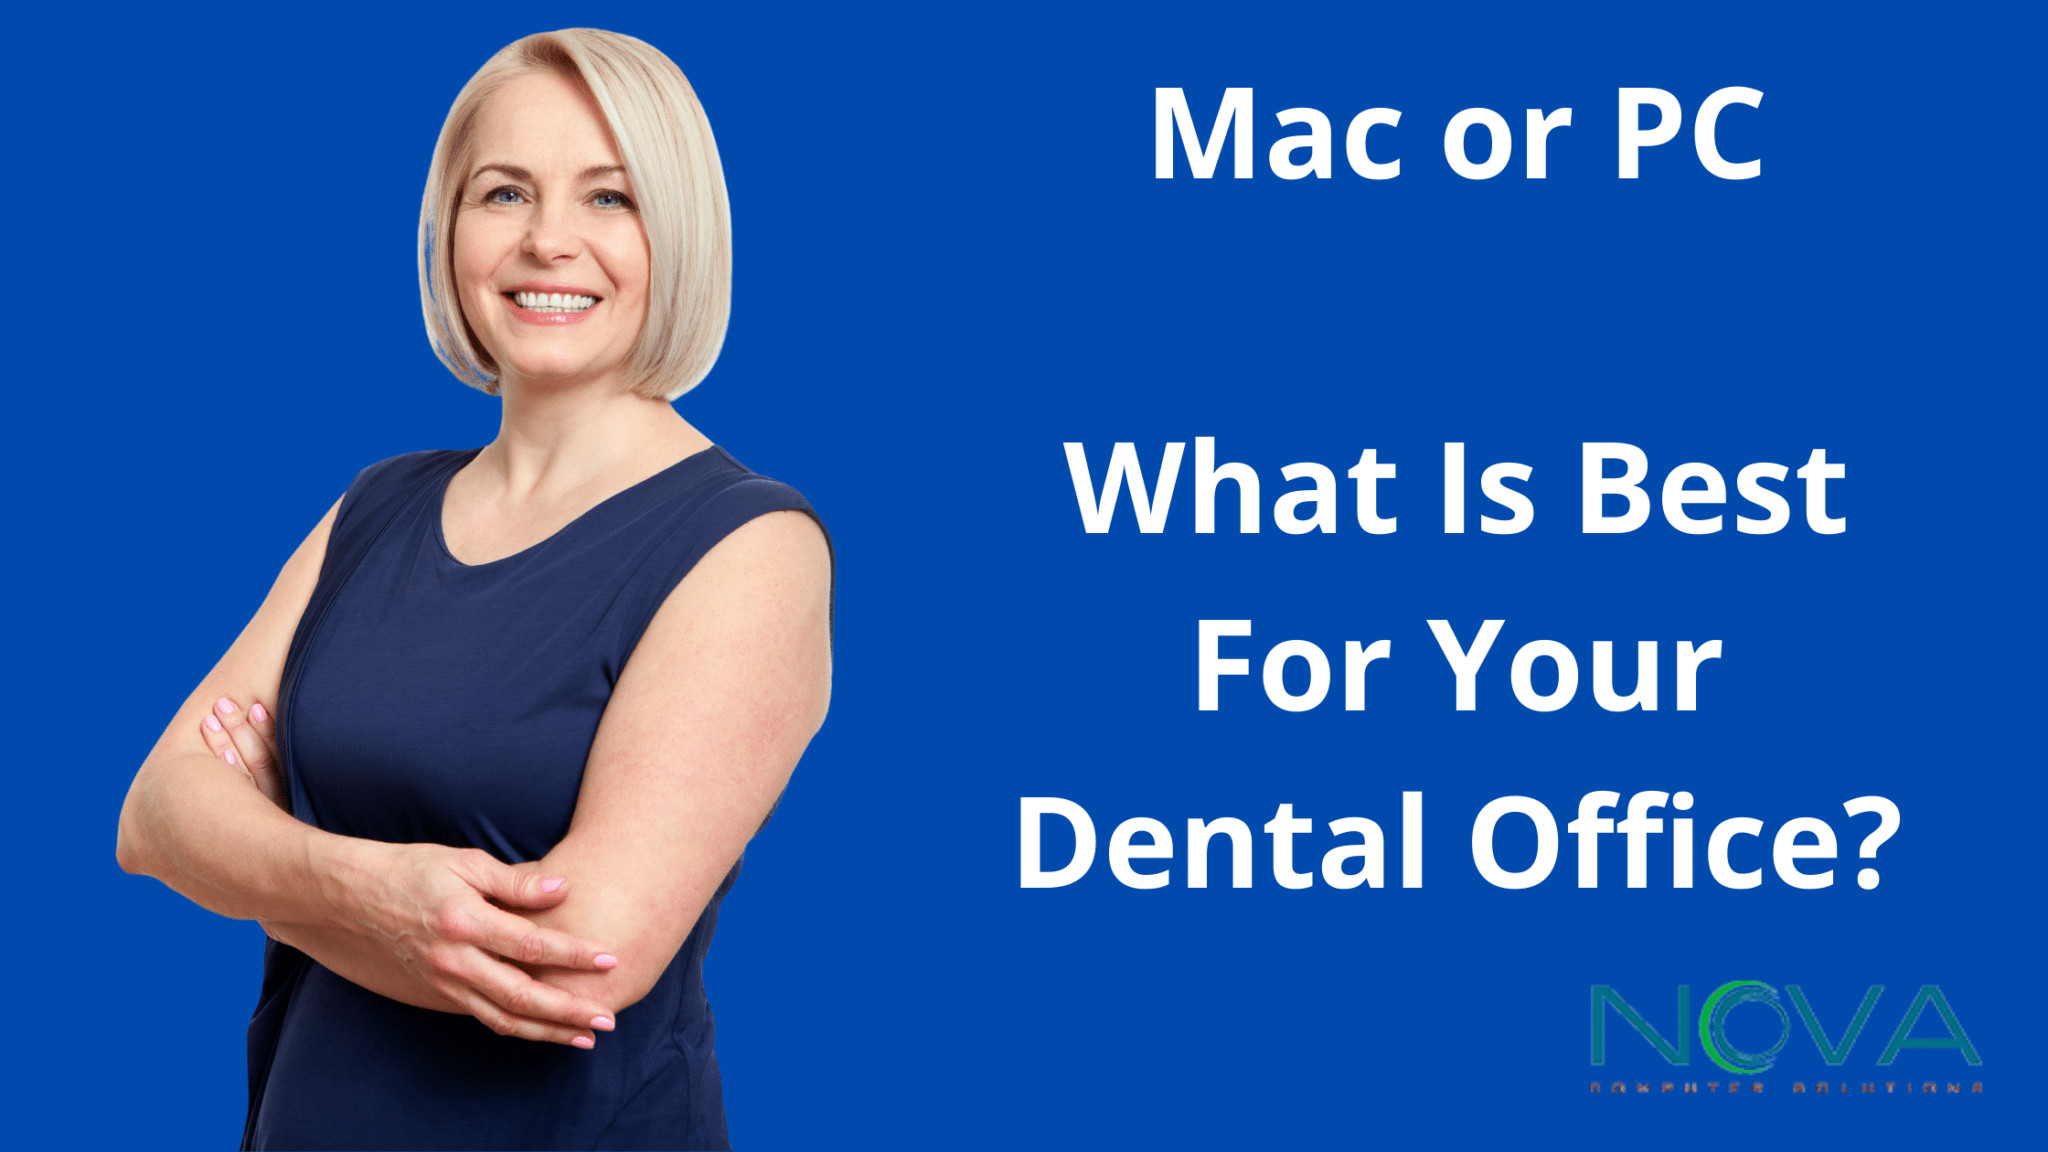 Mac or PC What Is Best For Your Dental Office?